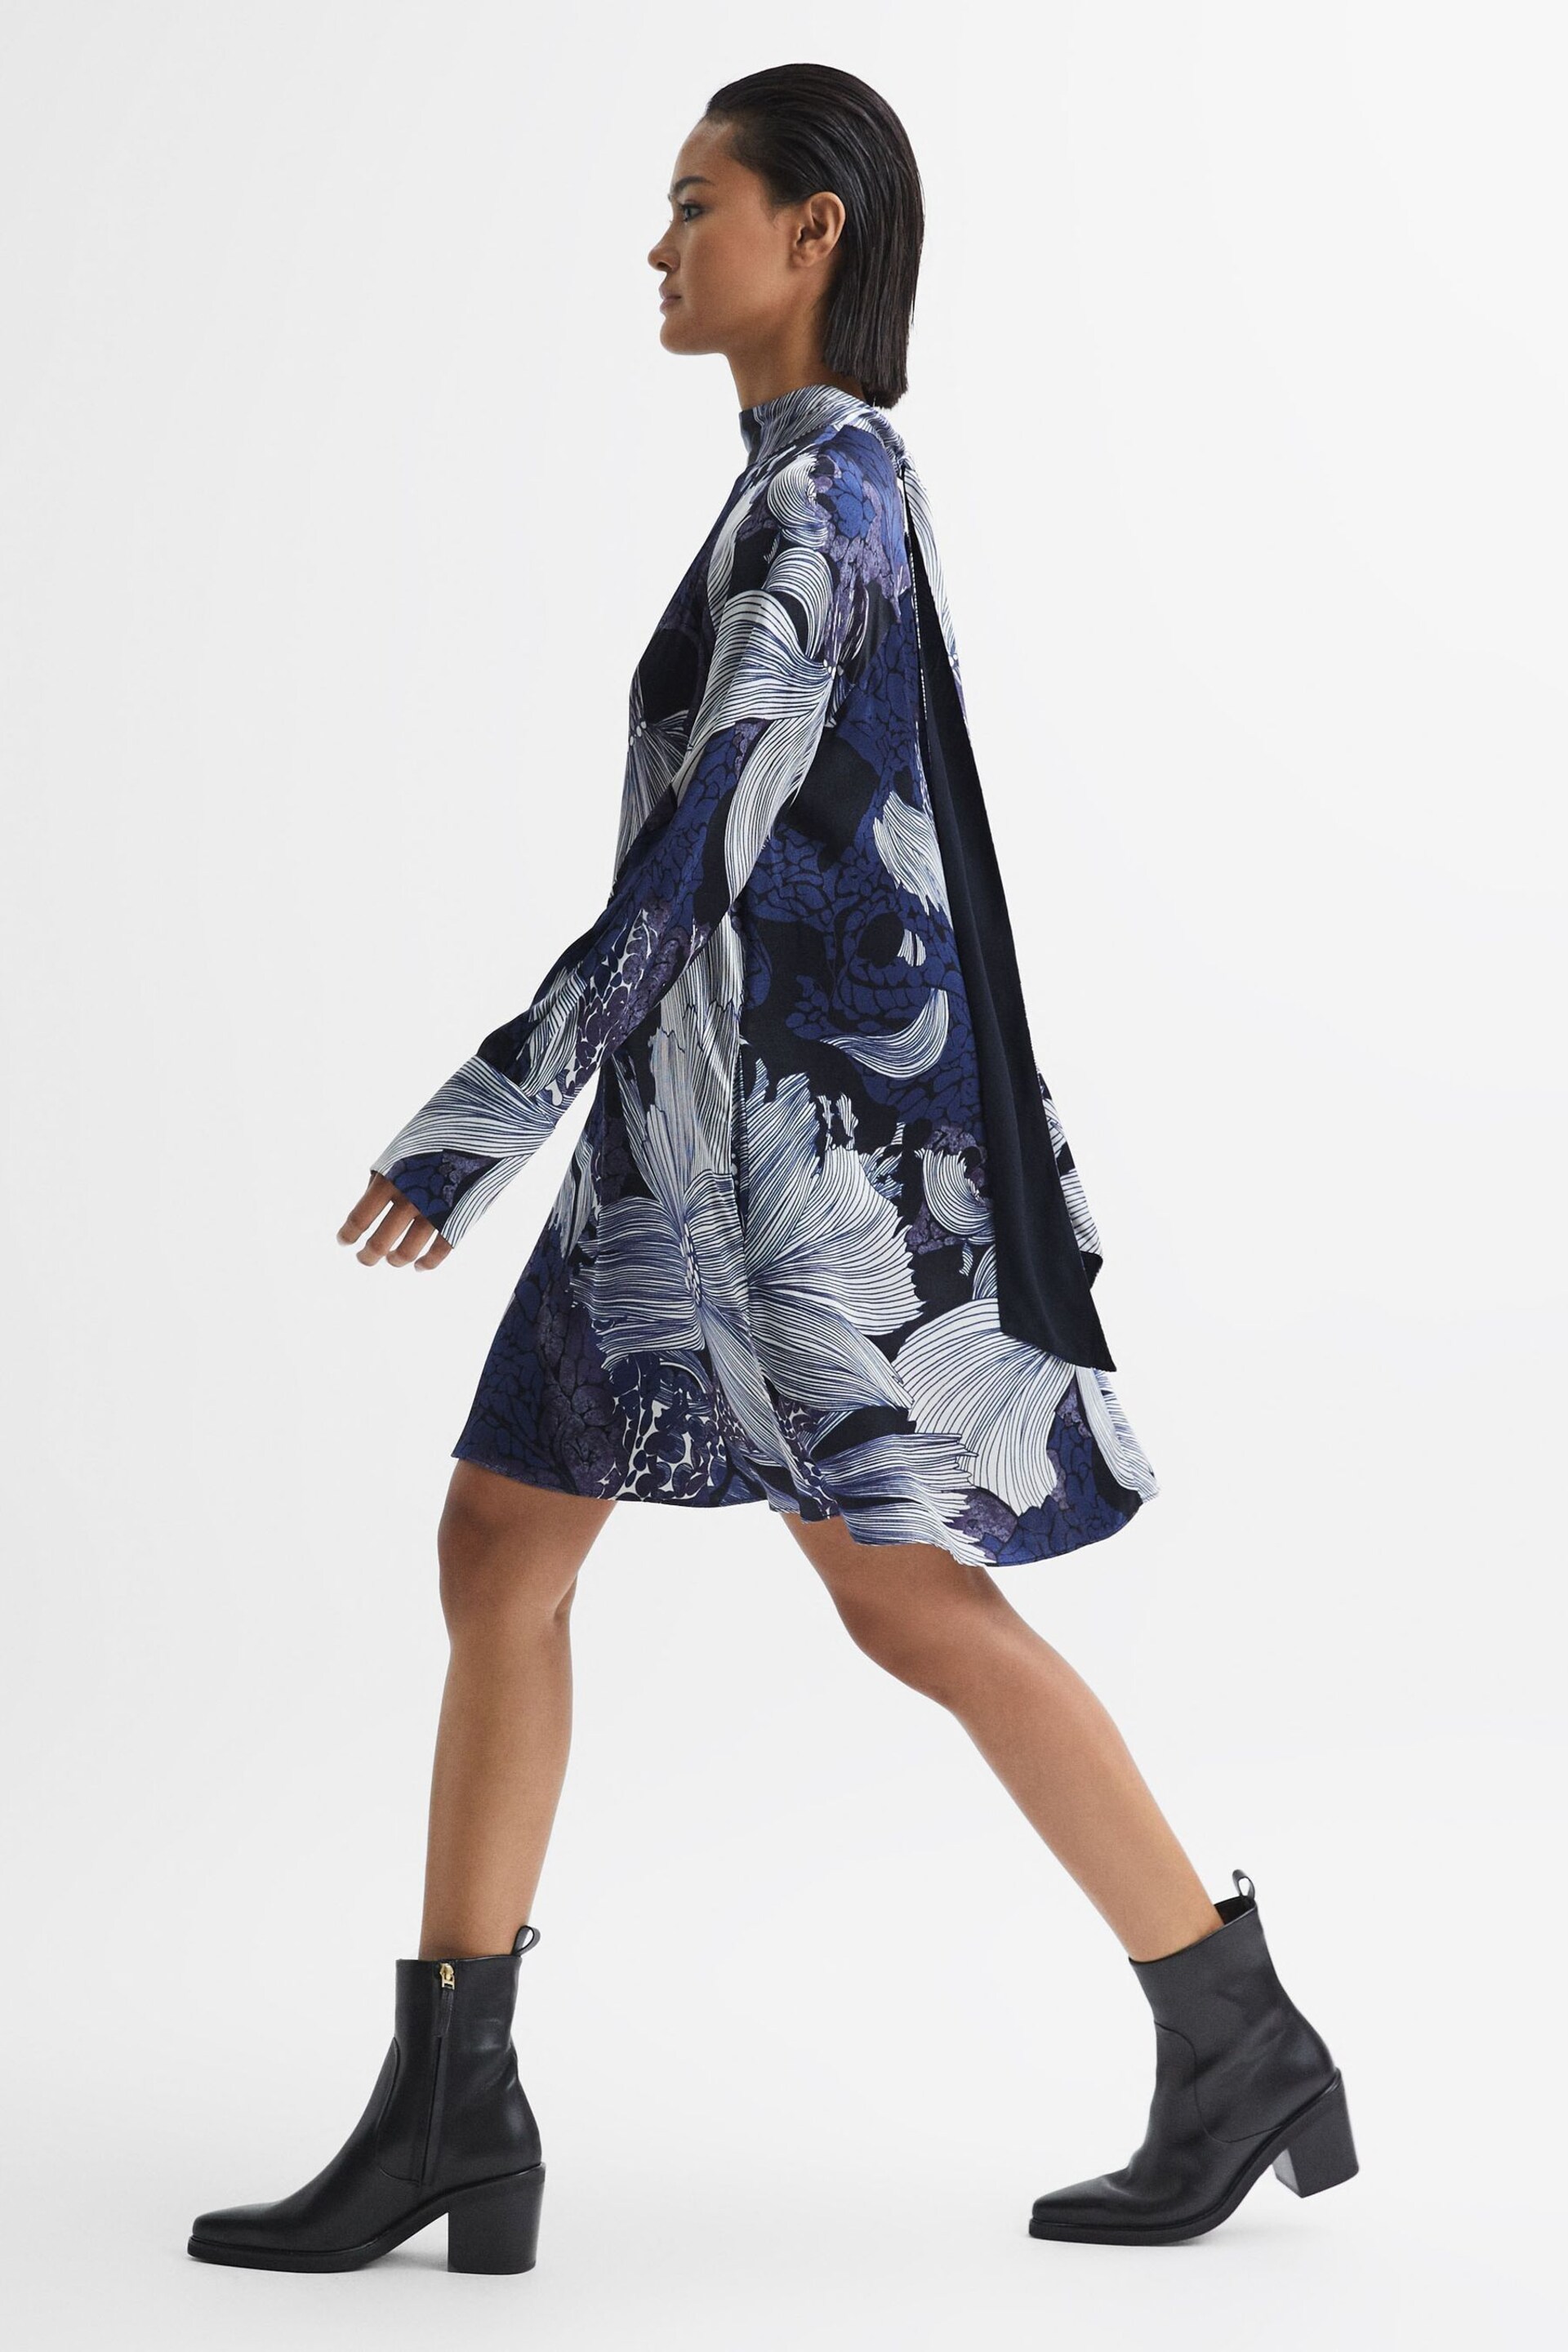 Reiss Blue/White Thea Relaxed Satin Printed Mini Dress - Image 3 of 7